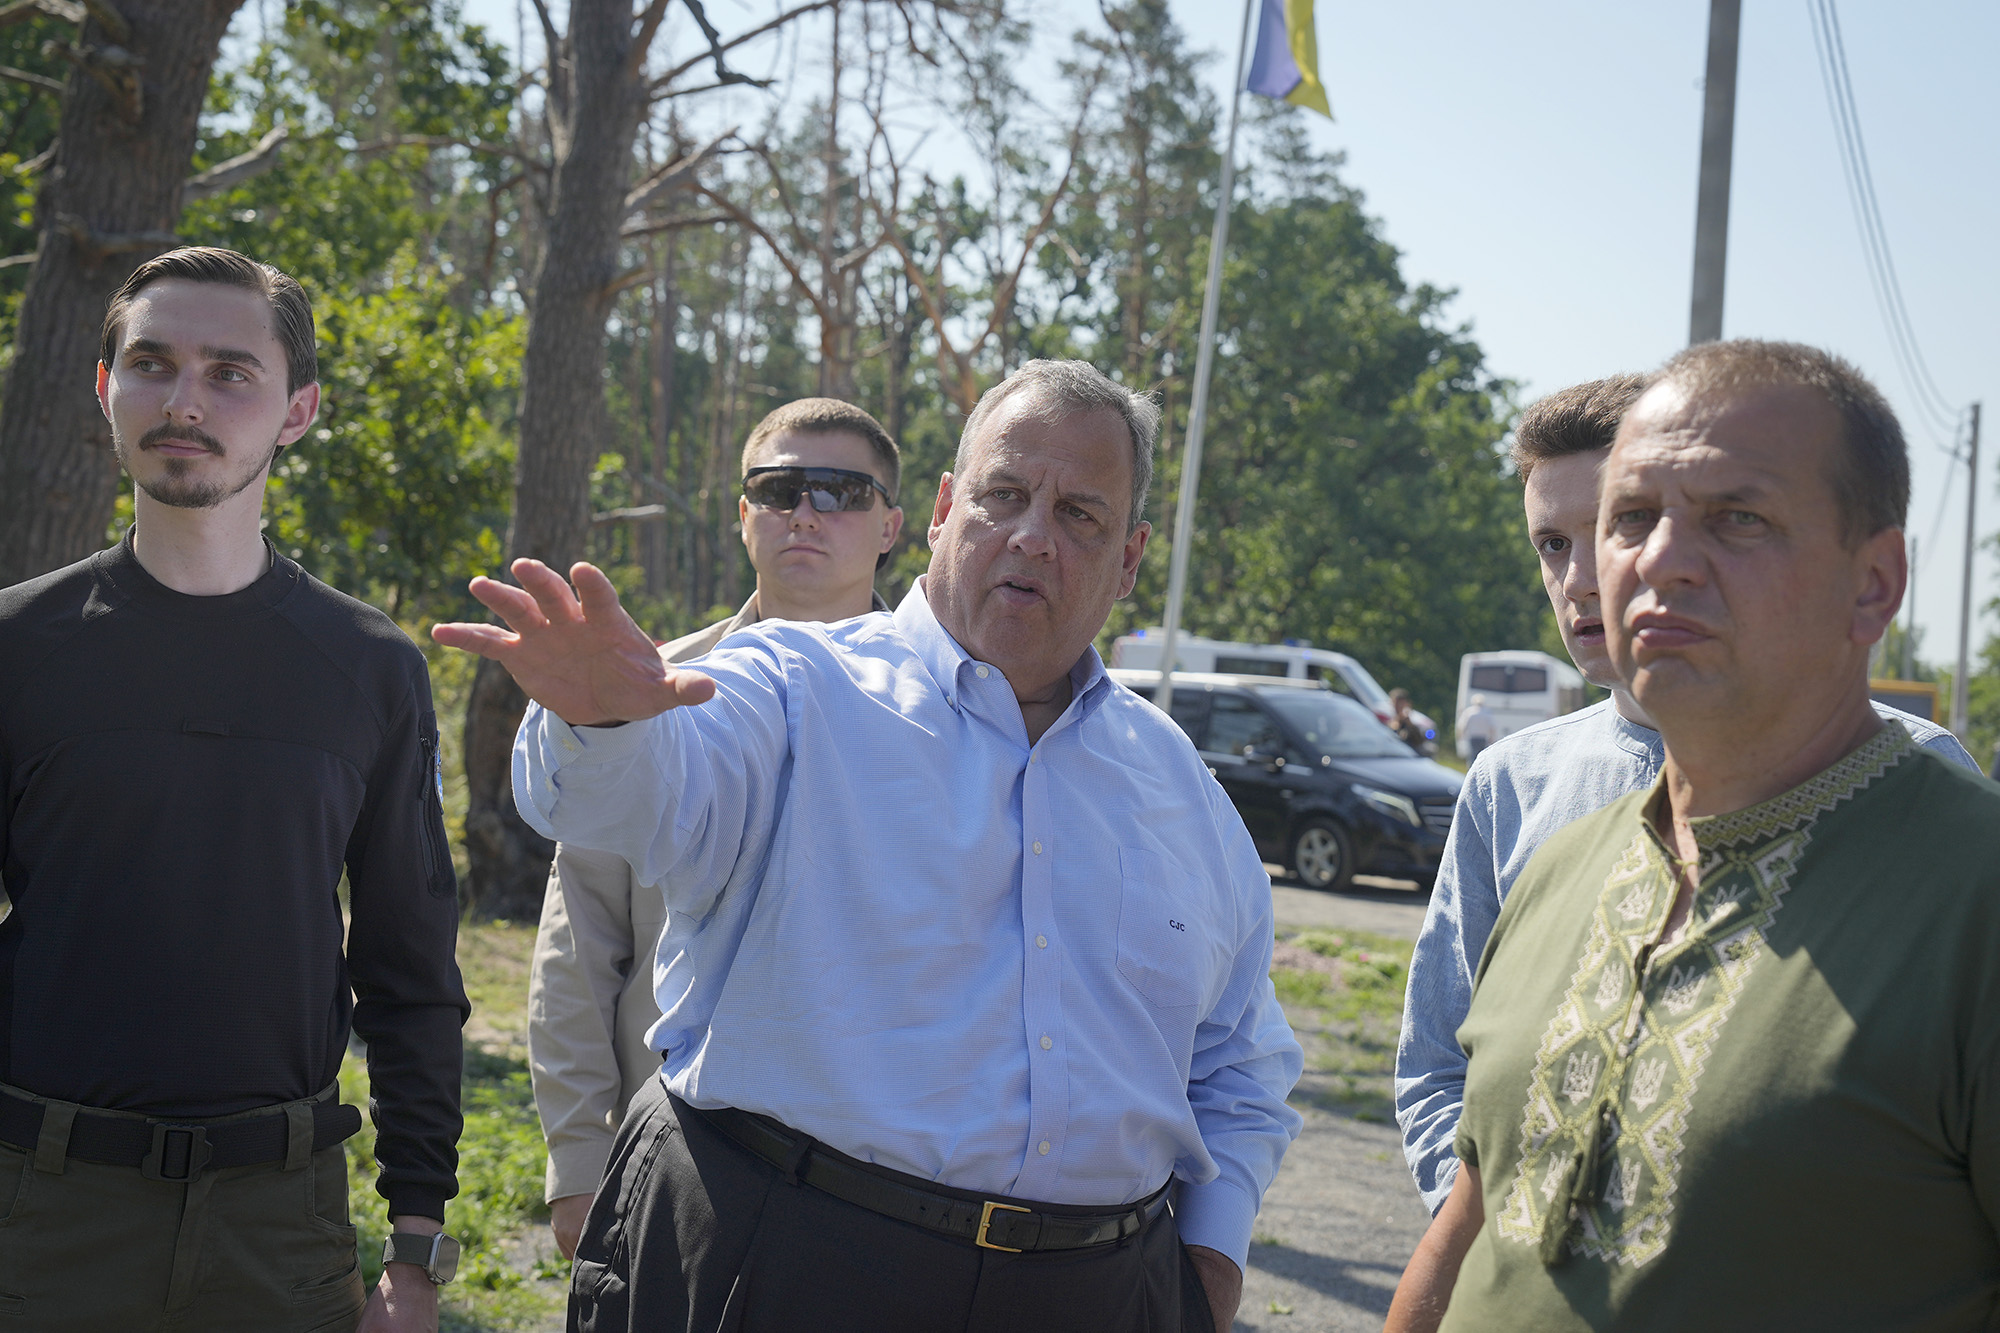 Republican presidential candidate Chris Christie, center, speaks with activists as he visits the village of Moshchun on the outskirts of Kyiv, Ukraine, on August 4.